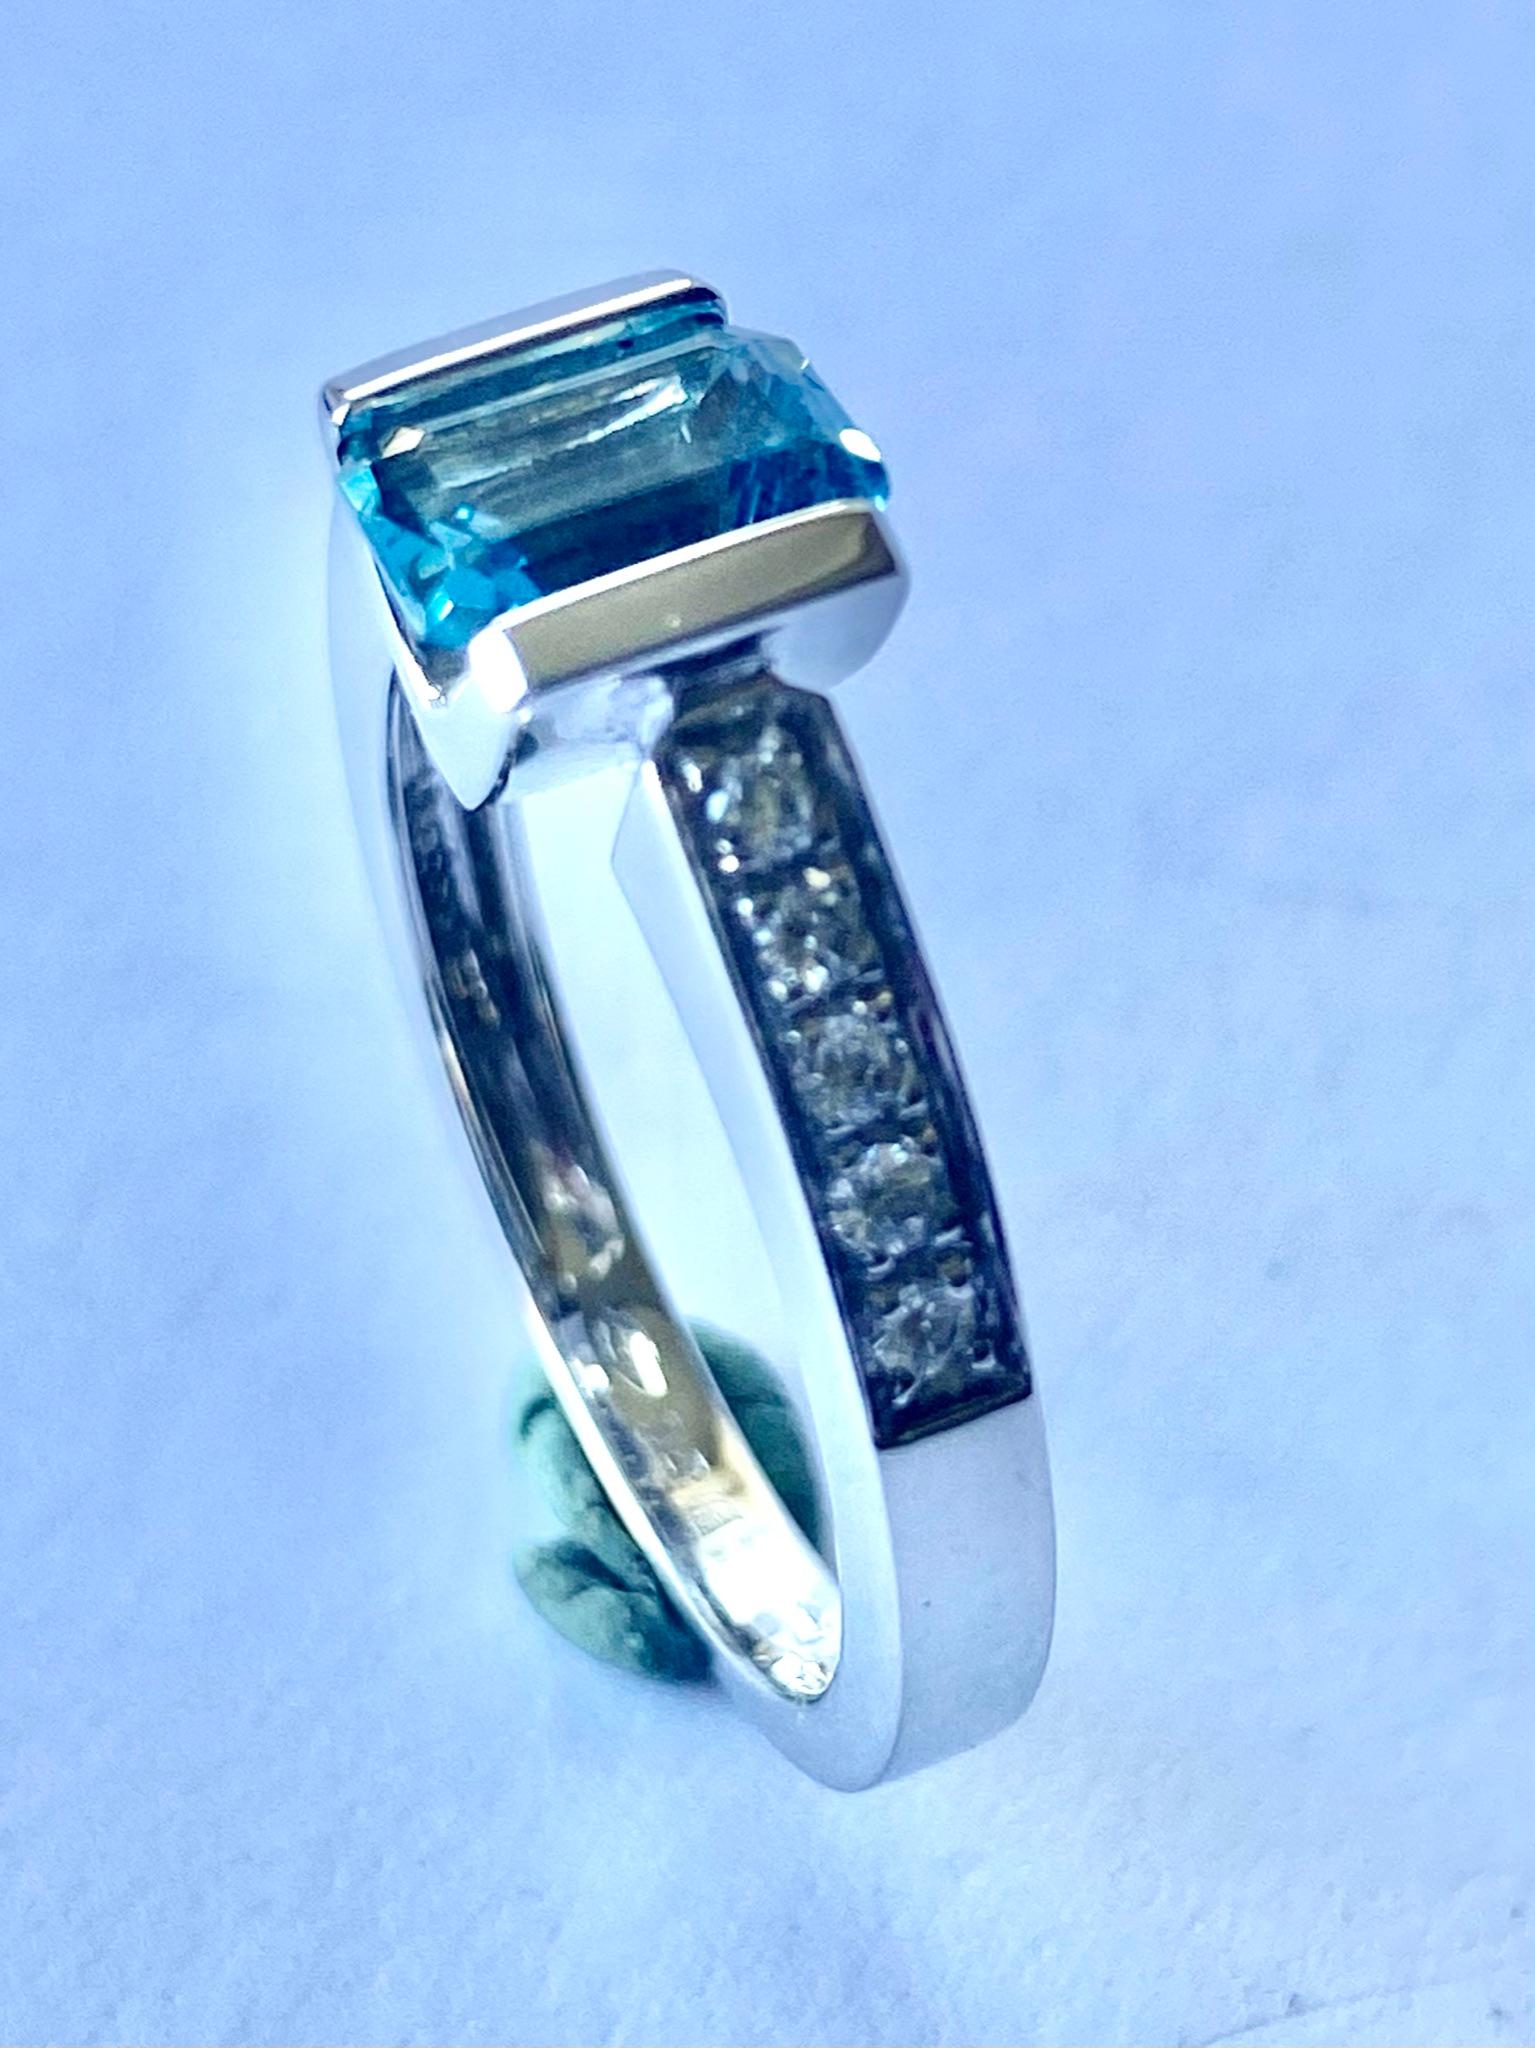 One (1) 18 Karat White Gold Ring, Stamped: 750 and  *3231 AL = Alberti  Gioielli Valenza Italy.
One Natural Aquamarine, emerald Cut = 0.95 ct.  (Light Blue color)
Ten (10) round briljant cut diamonds eight: 0.18 ct.  VS  F-G 
Weight of the Ring: 